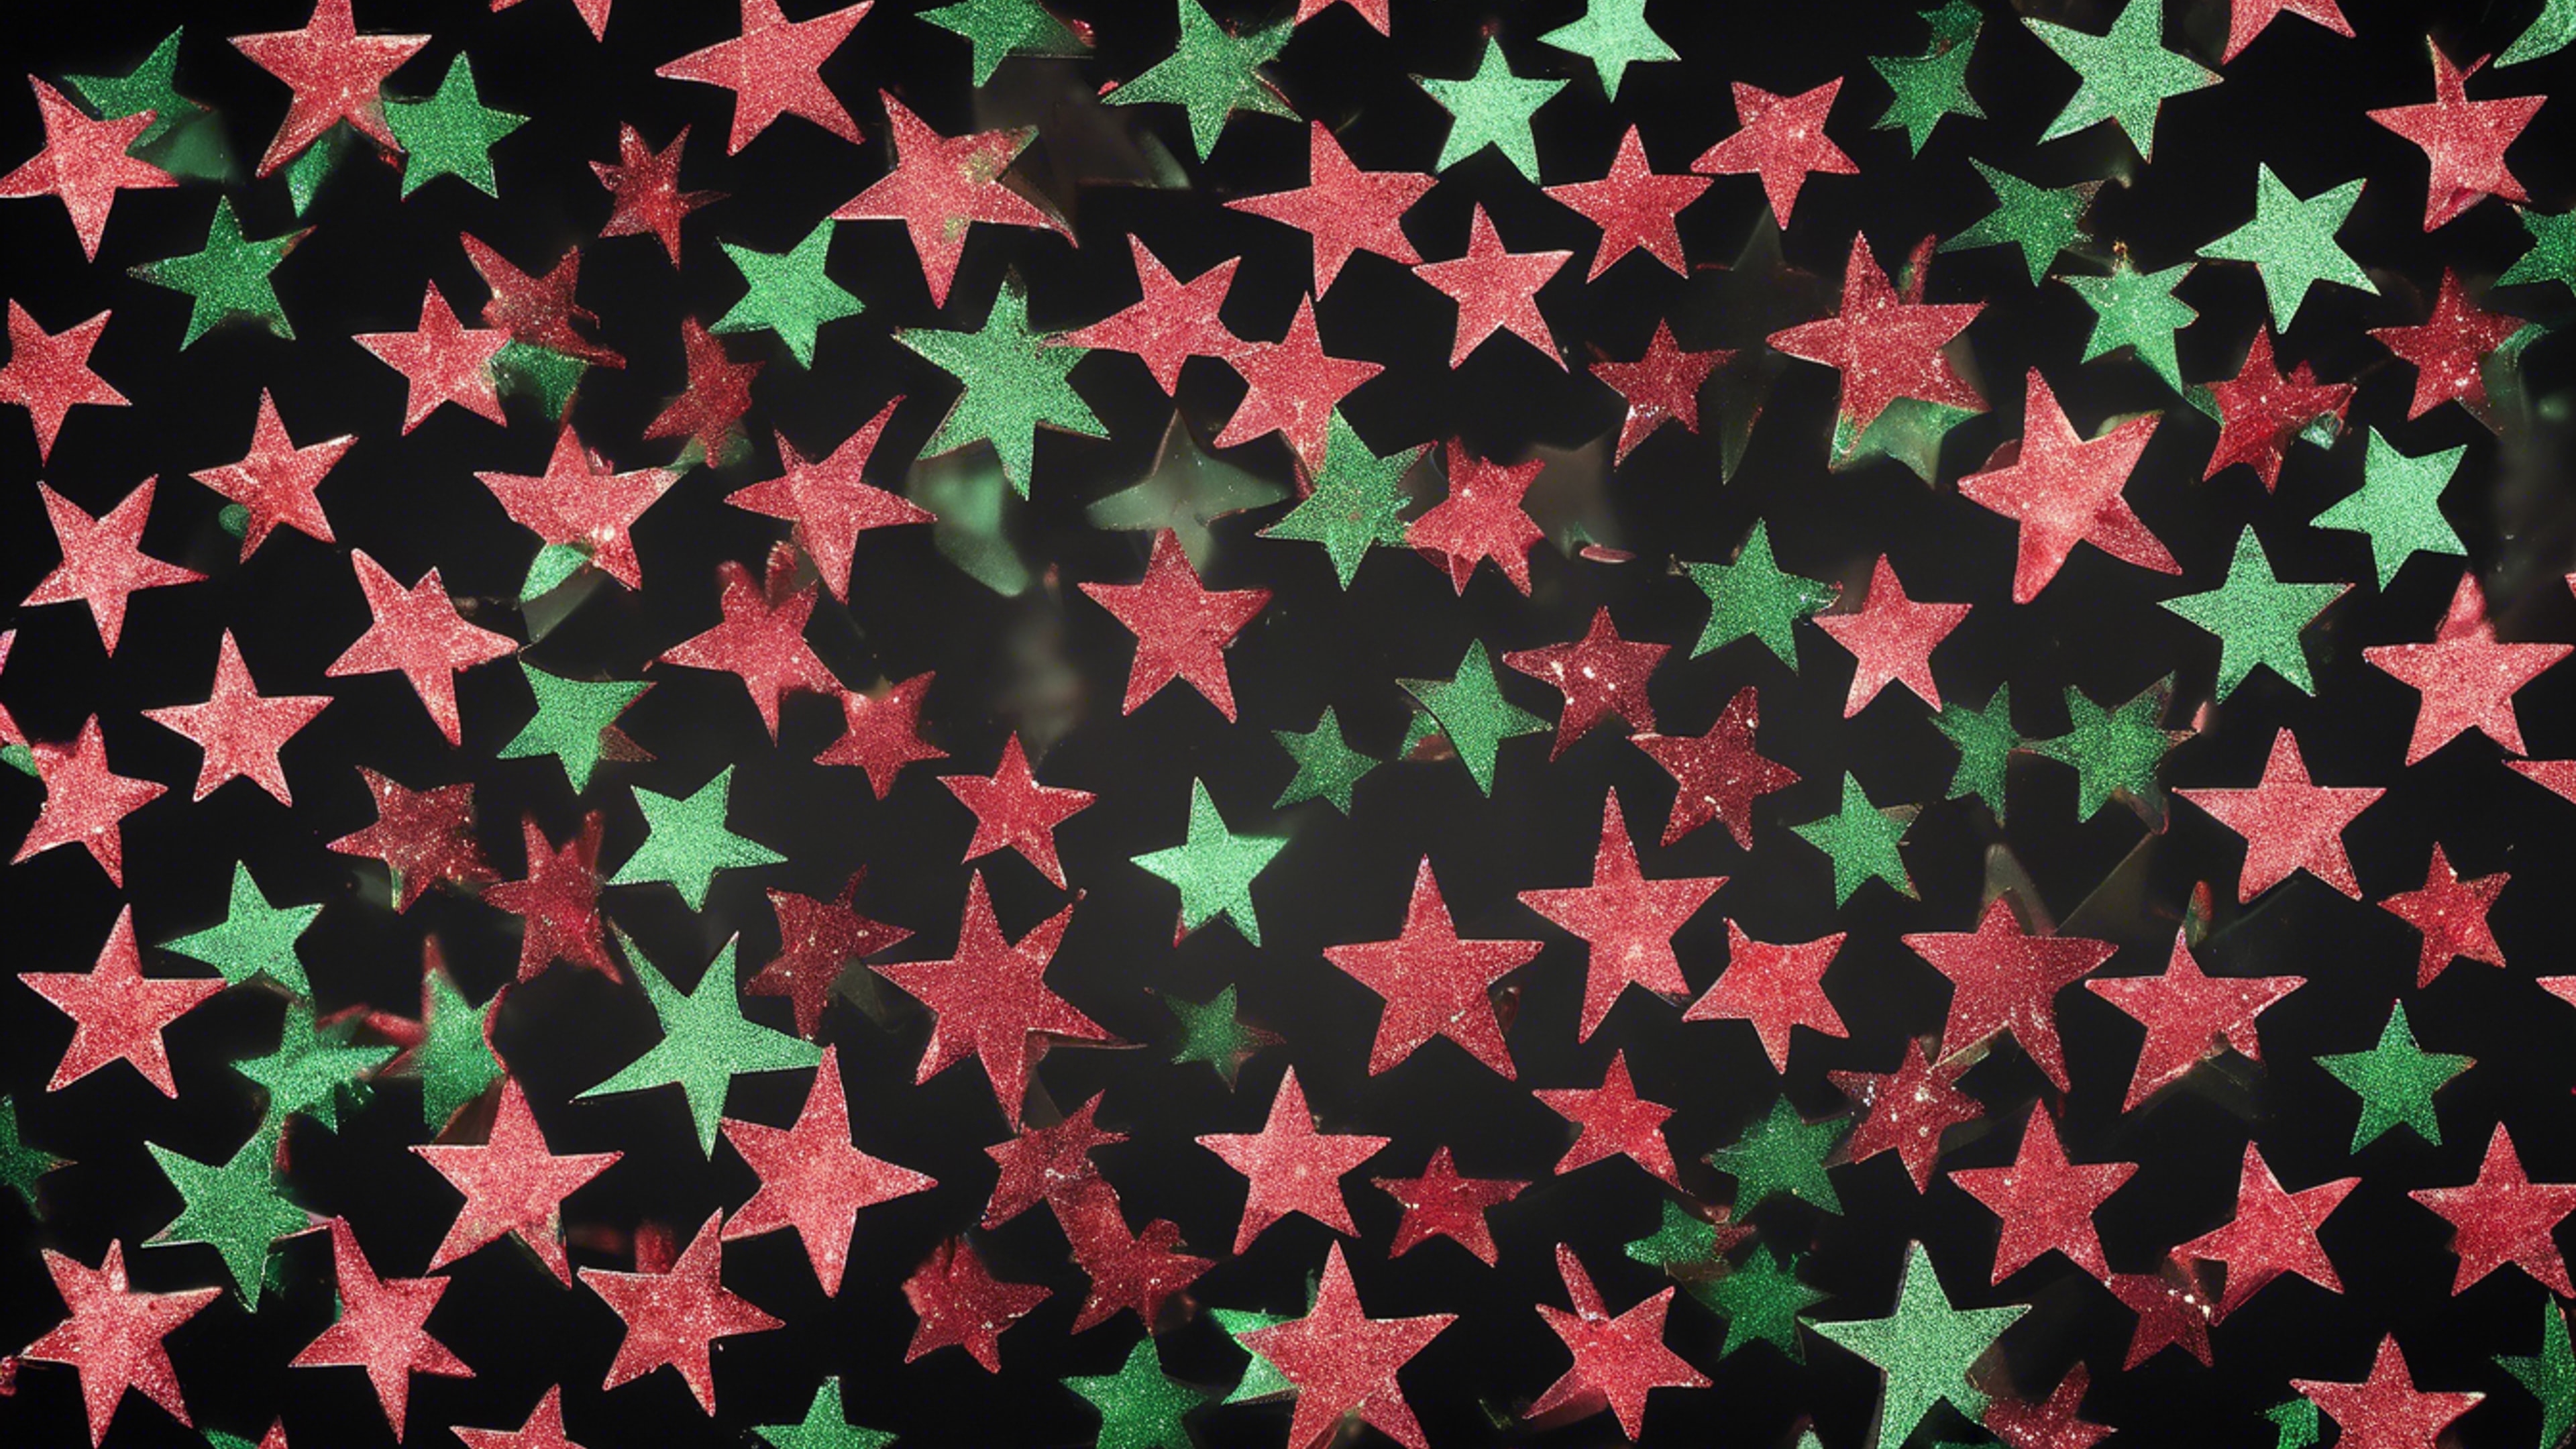 Green and red glitter forming star shapes on a black background Tapet[2fe752b5dc5f4f35ba35]